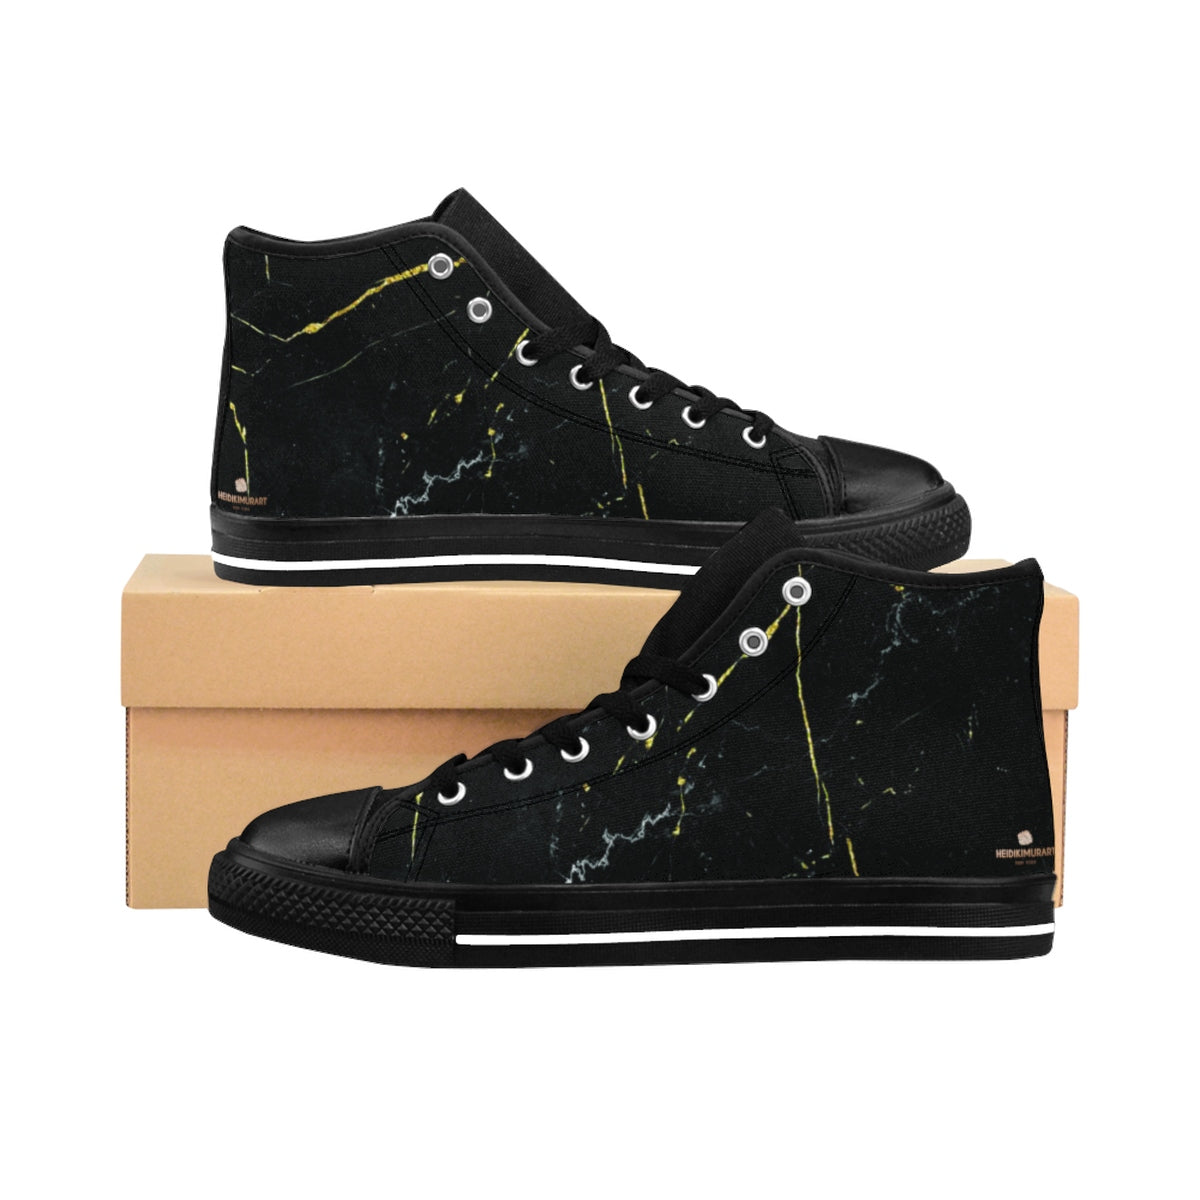 Black Marble Print Men's High Tops, Abstract Print Men's High-Top Sneakers Tennis Shoes-Men's High Top Sneakers-Black-US 9-Heidi Kimura Art LLC